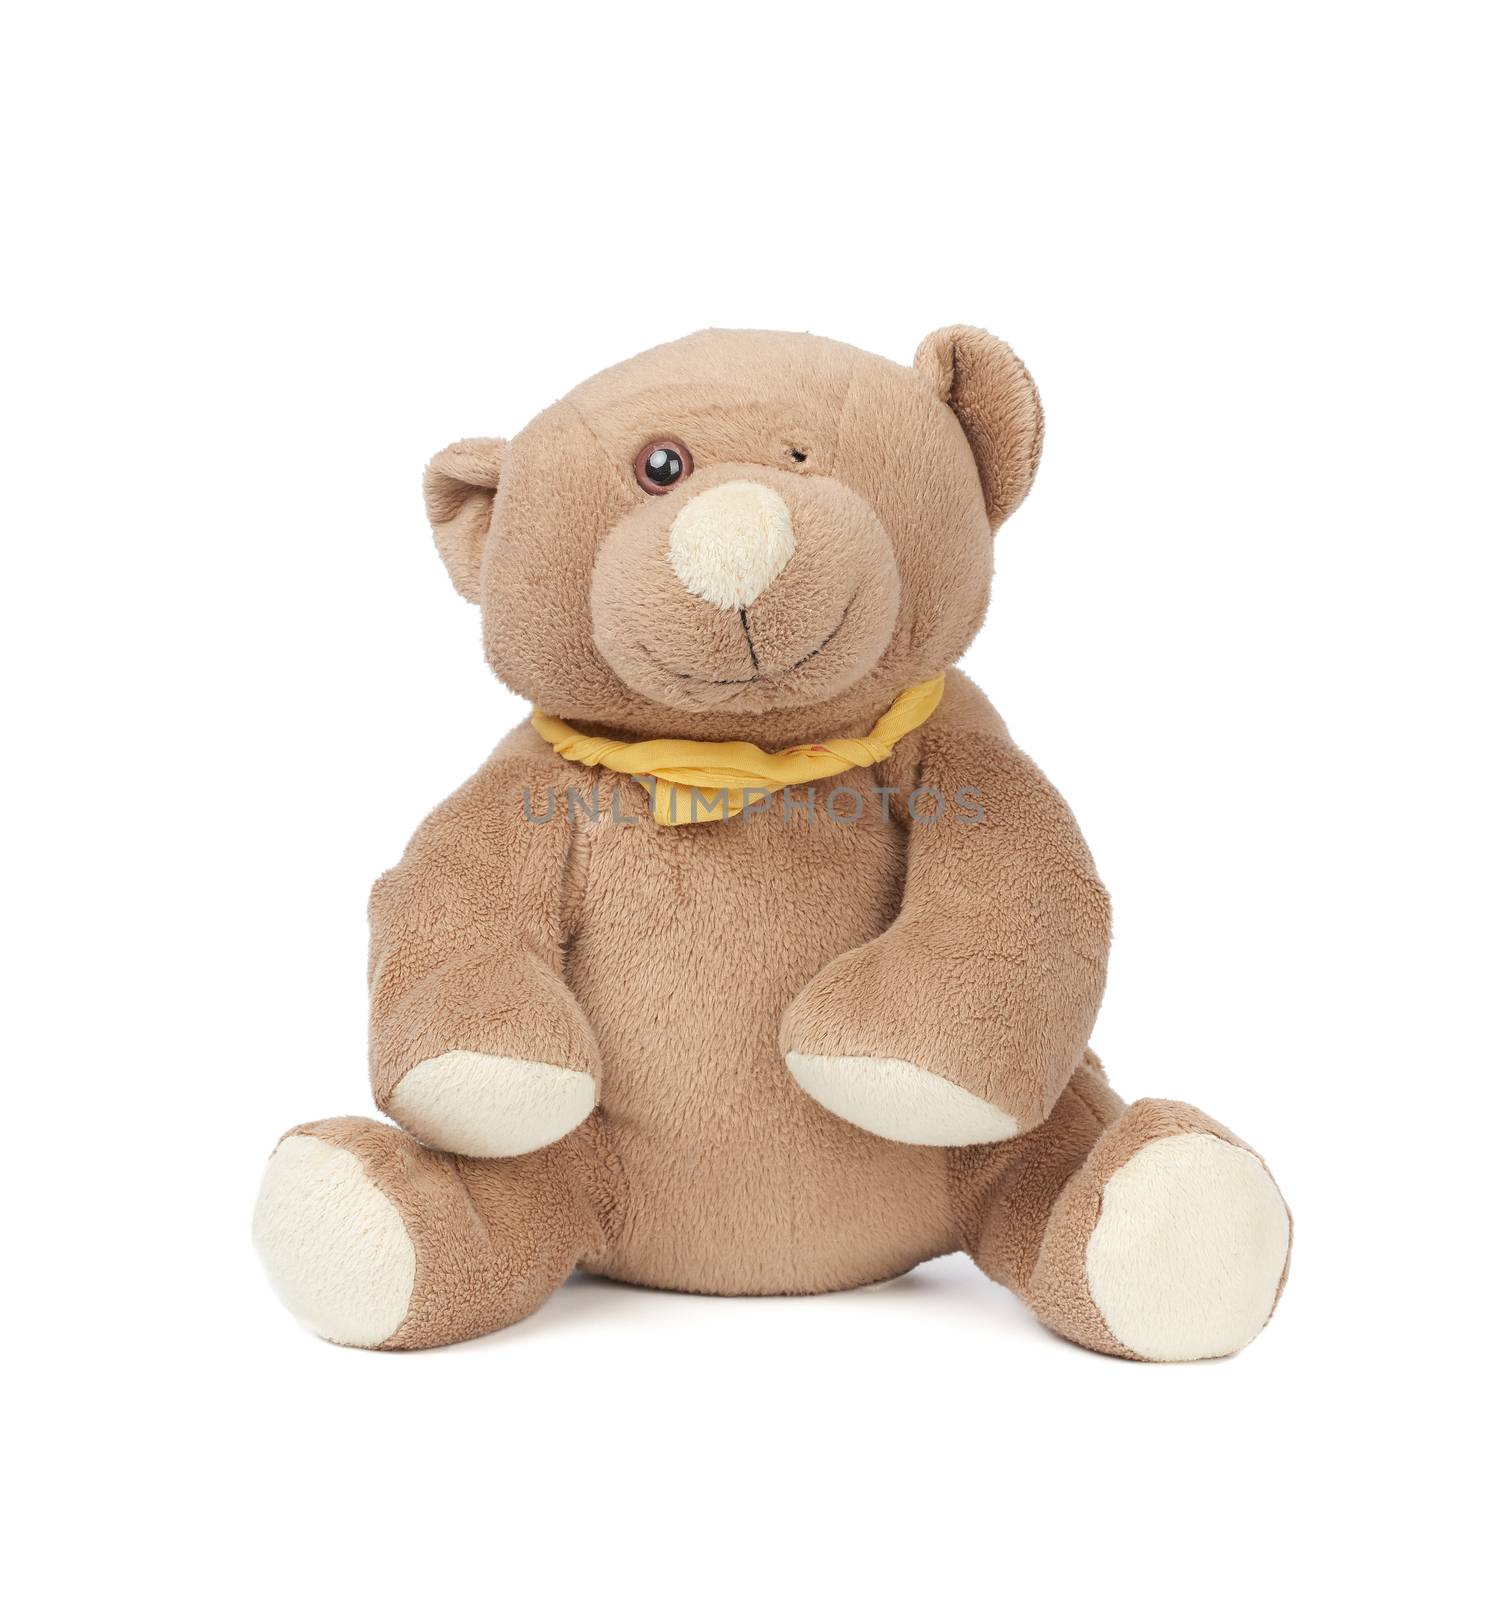 miserable brown teddy bear sitting on a white isolated backgroun by ndanko